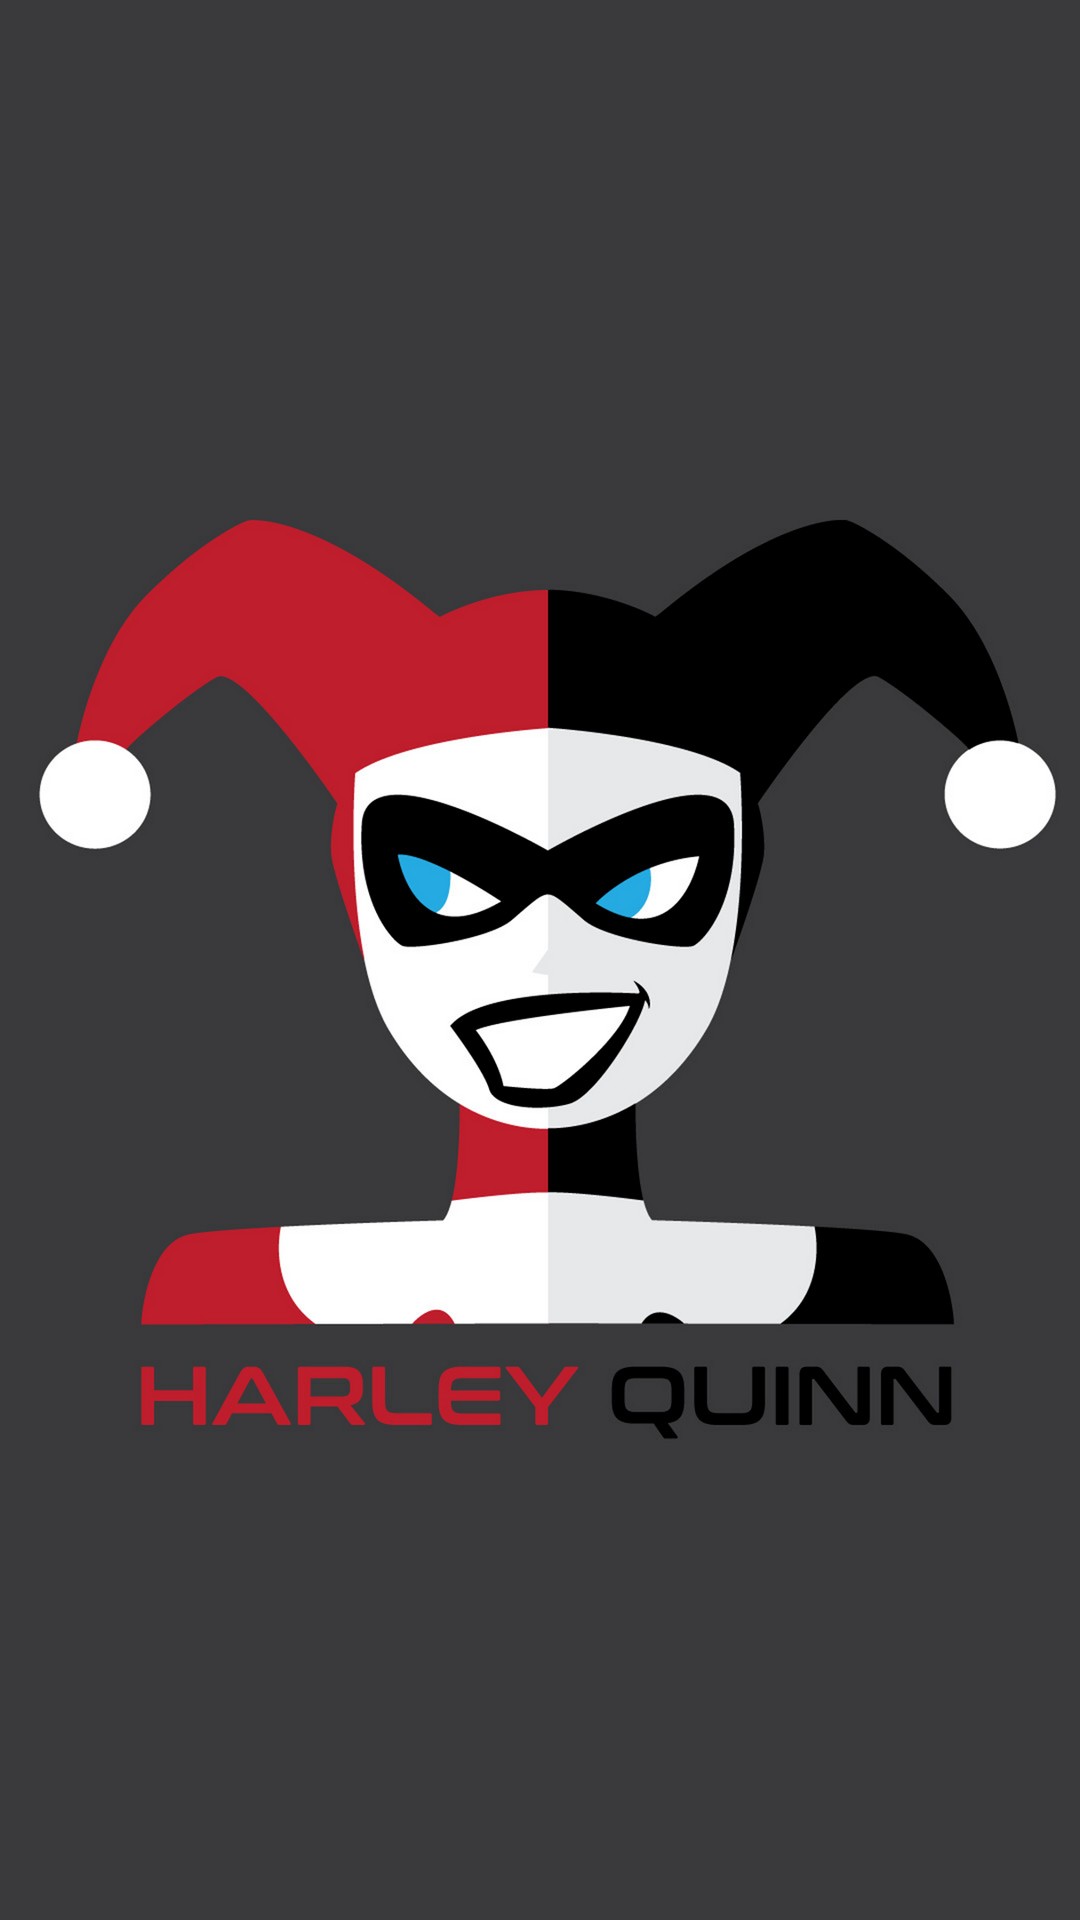 Pictures Of Harley Quinn Wallpaper iPhone with image resolution 1080x1920 pixel. You can make this wallpaper for your iPhone 5, 6, 7, 8, X backgrounds, Mobile Screensaver, or iPad Lock Screen